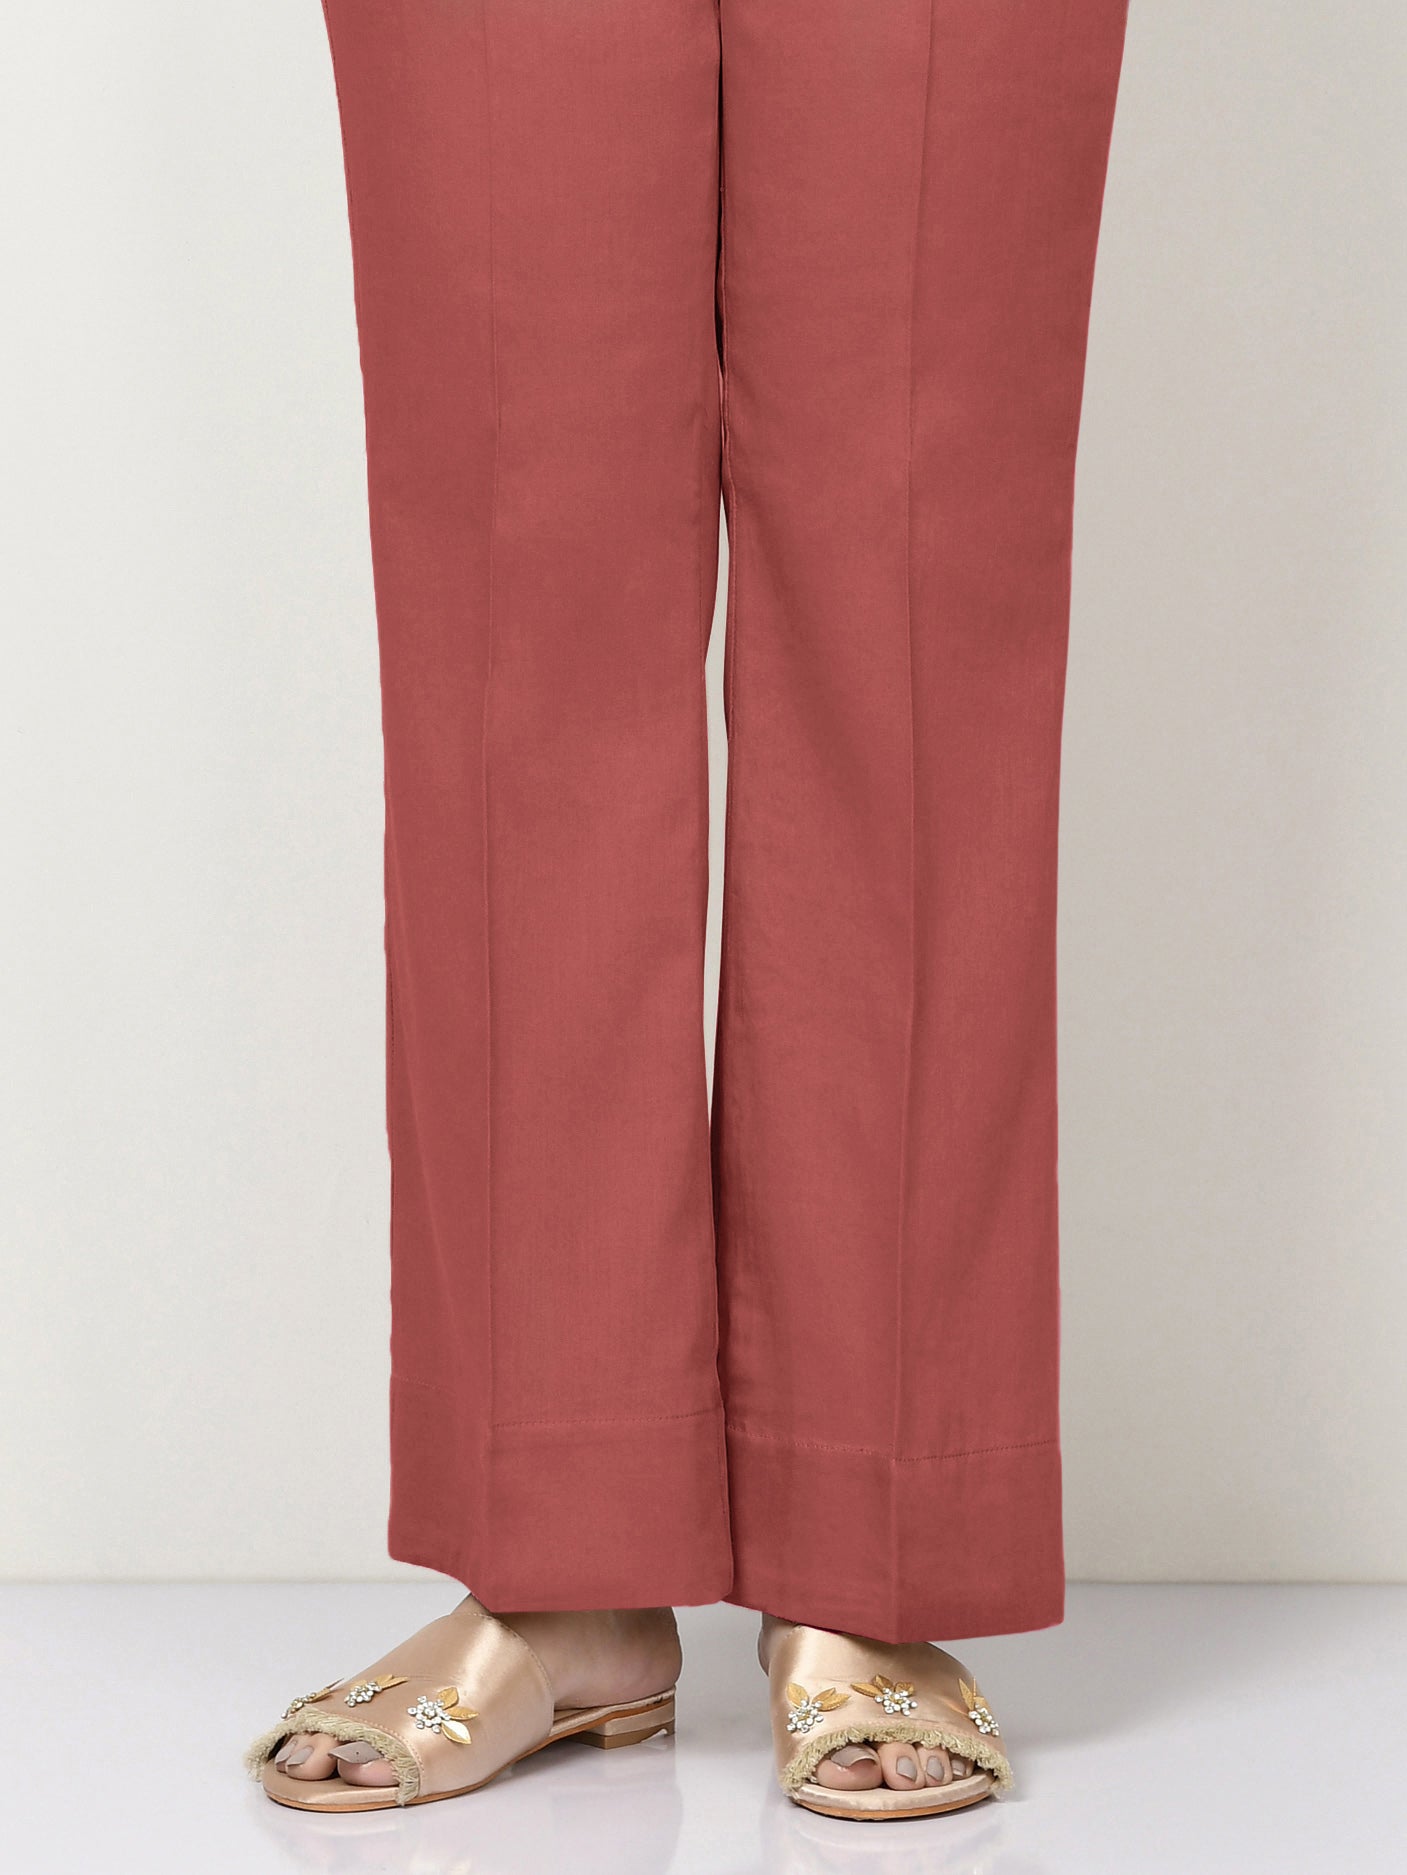 Unstitched Winter Cotton Trouser - Light Red